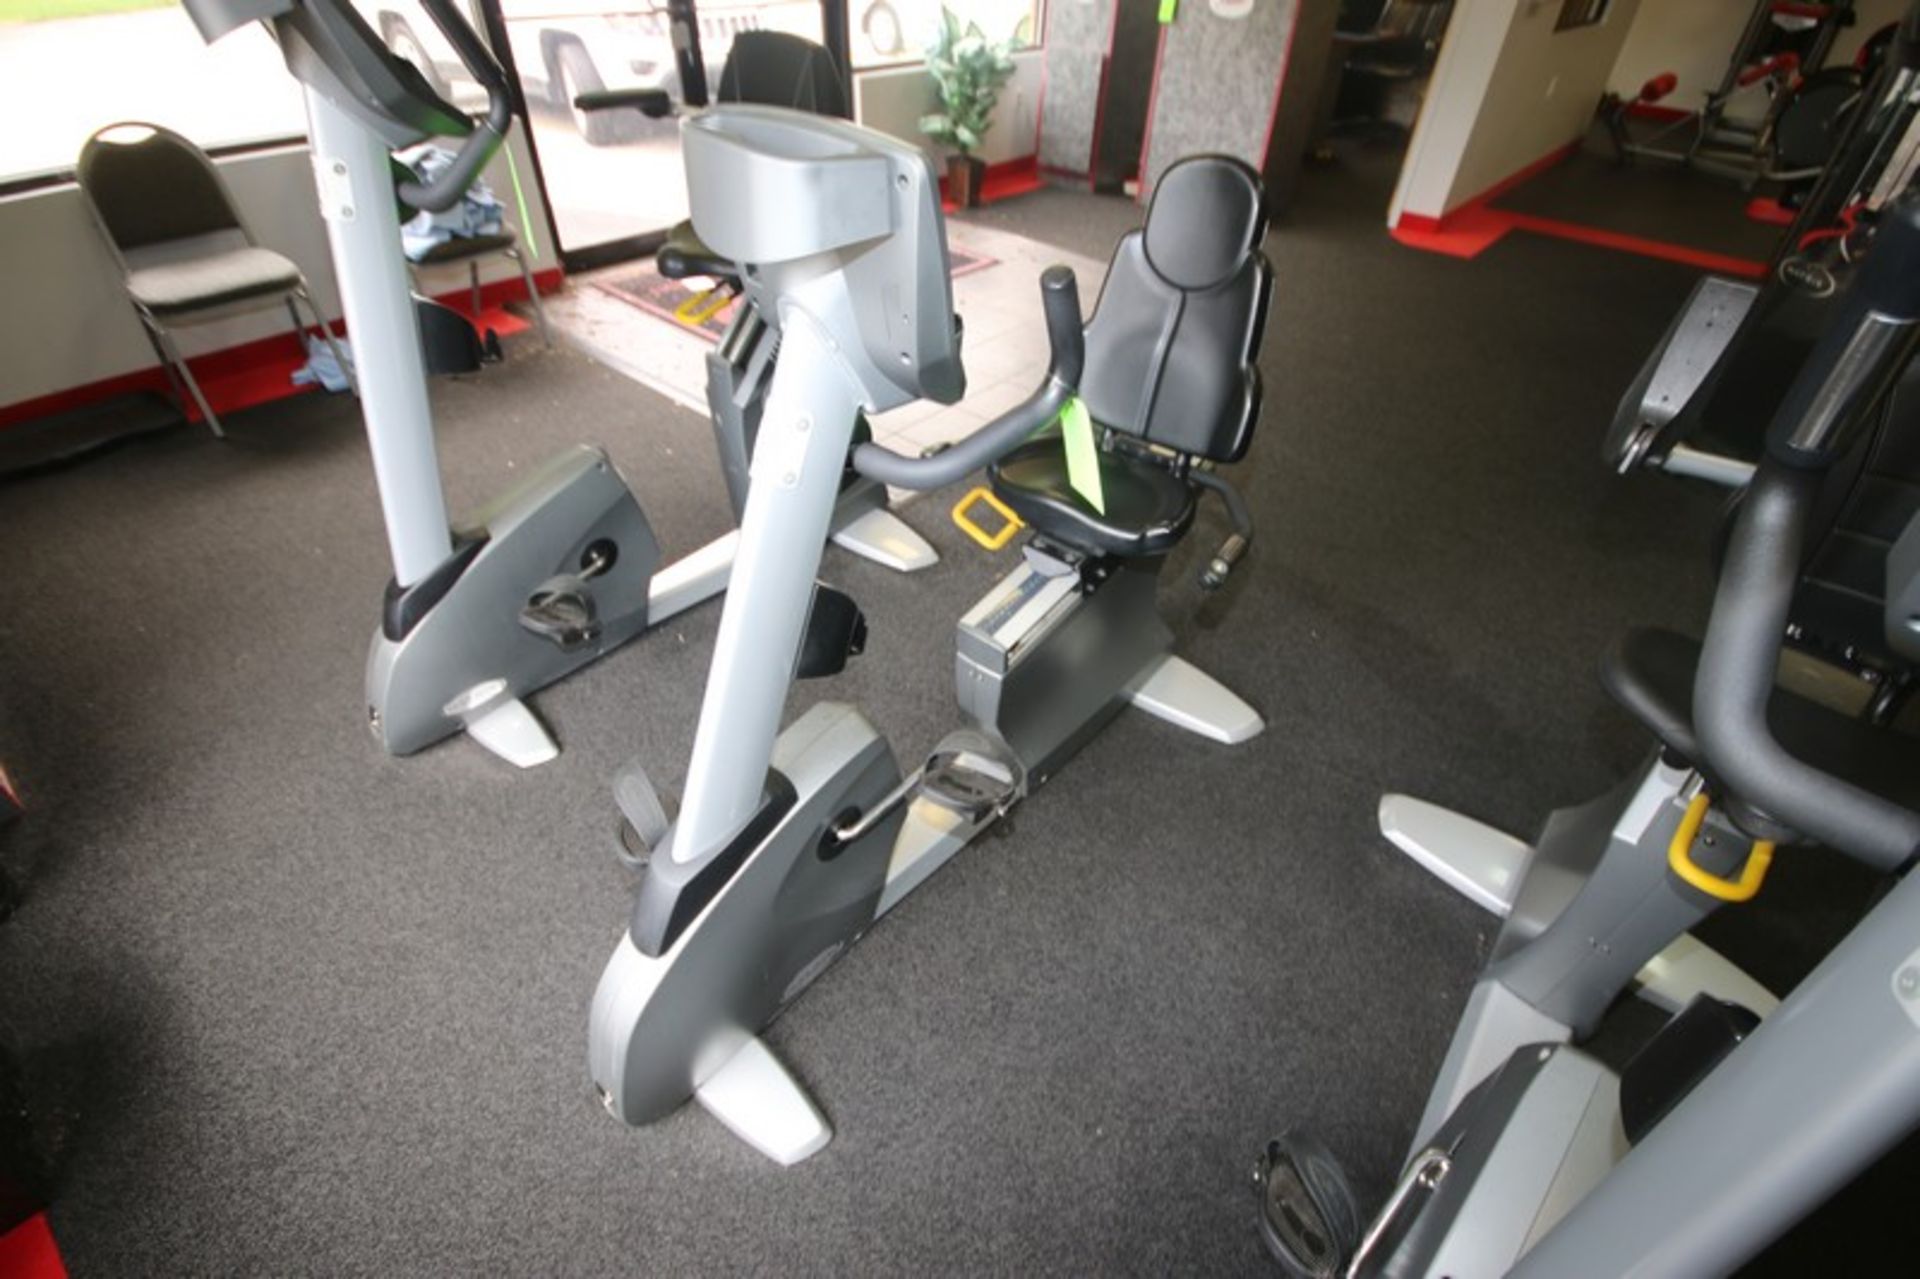 Matrix Stationary Bike, M/N MX-R5x, with Adjustable Seat, Overall Dims.: Aprox. 59" L x 30" W x - Image 4 of 5